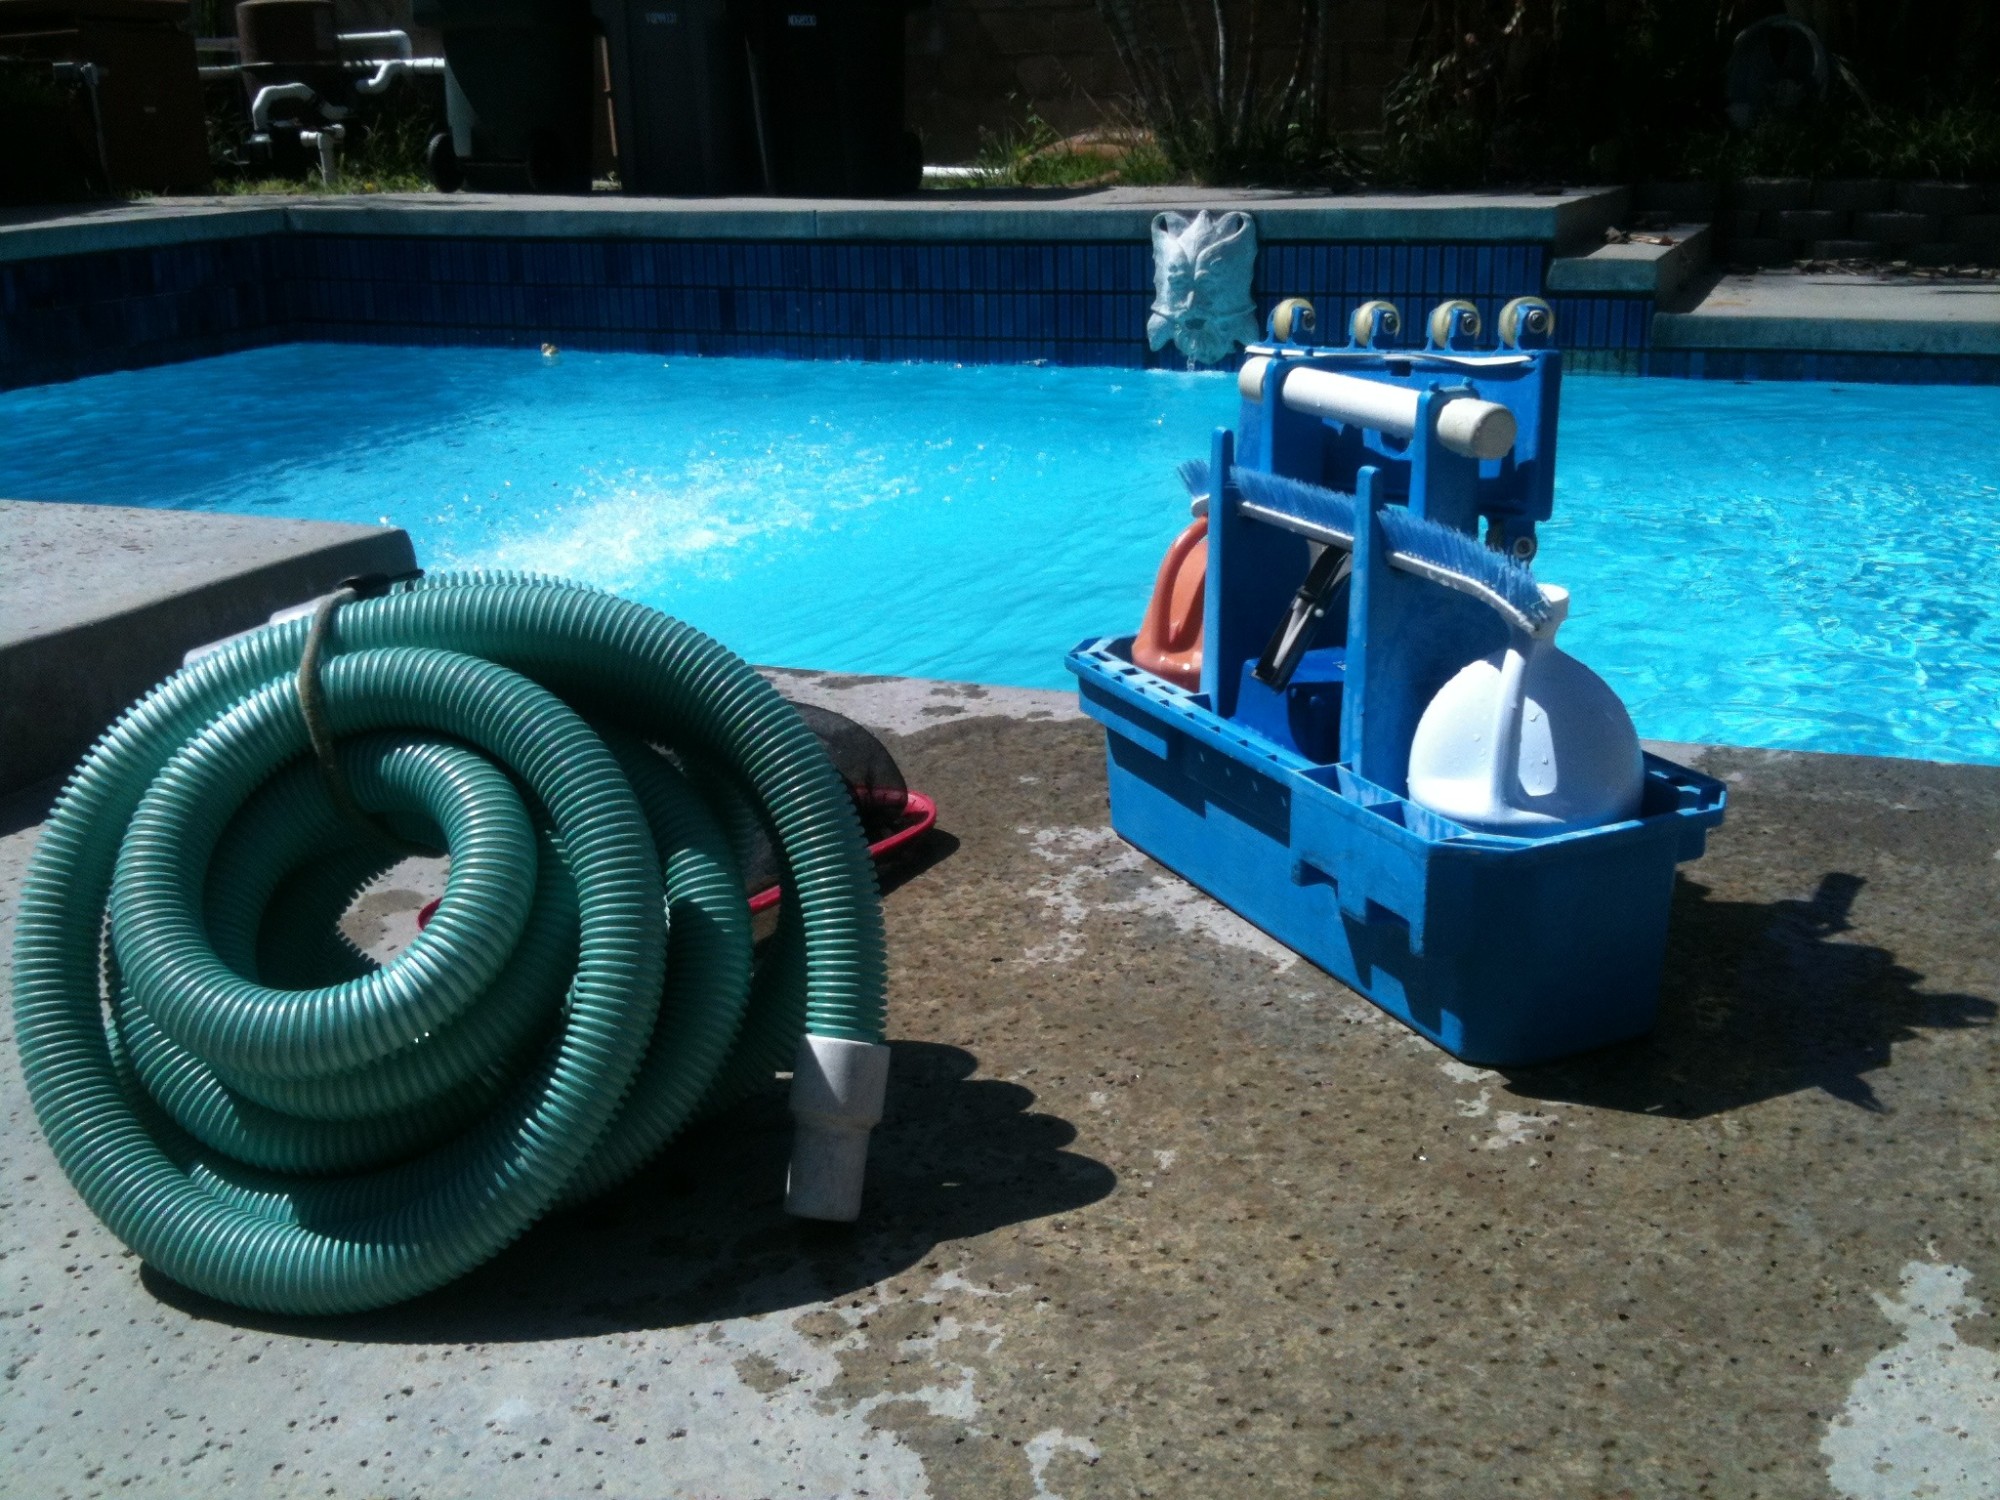 Pool Cleaning Near Me: How To Choose the Right Pool Cleaning Company